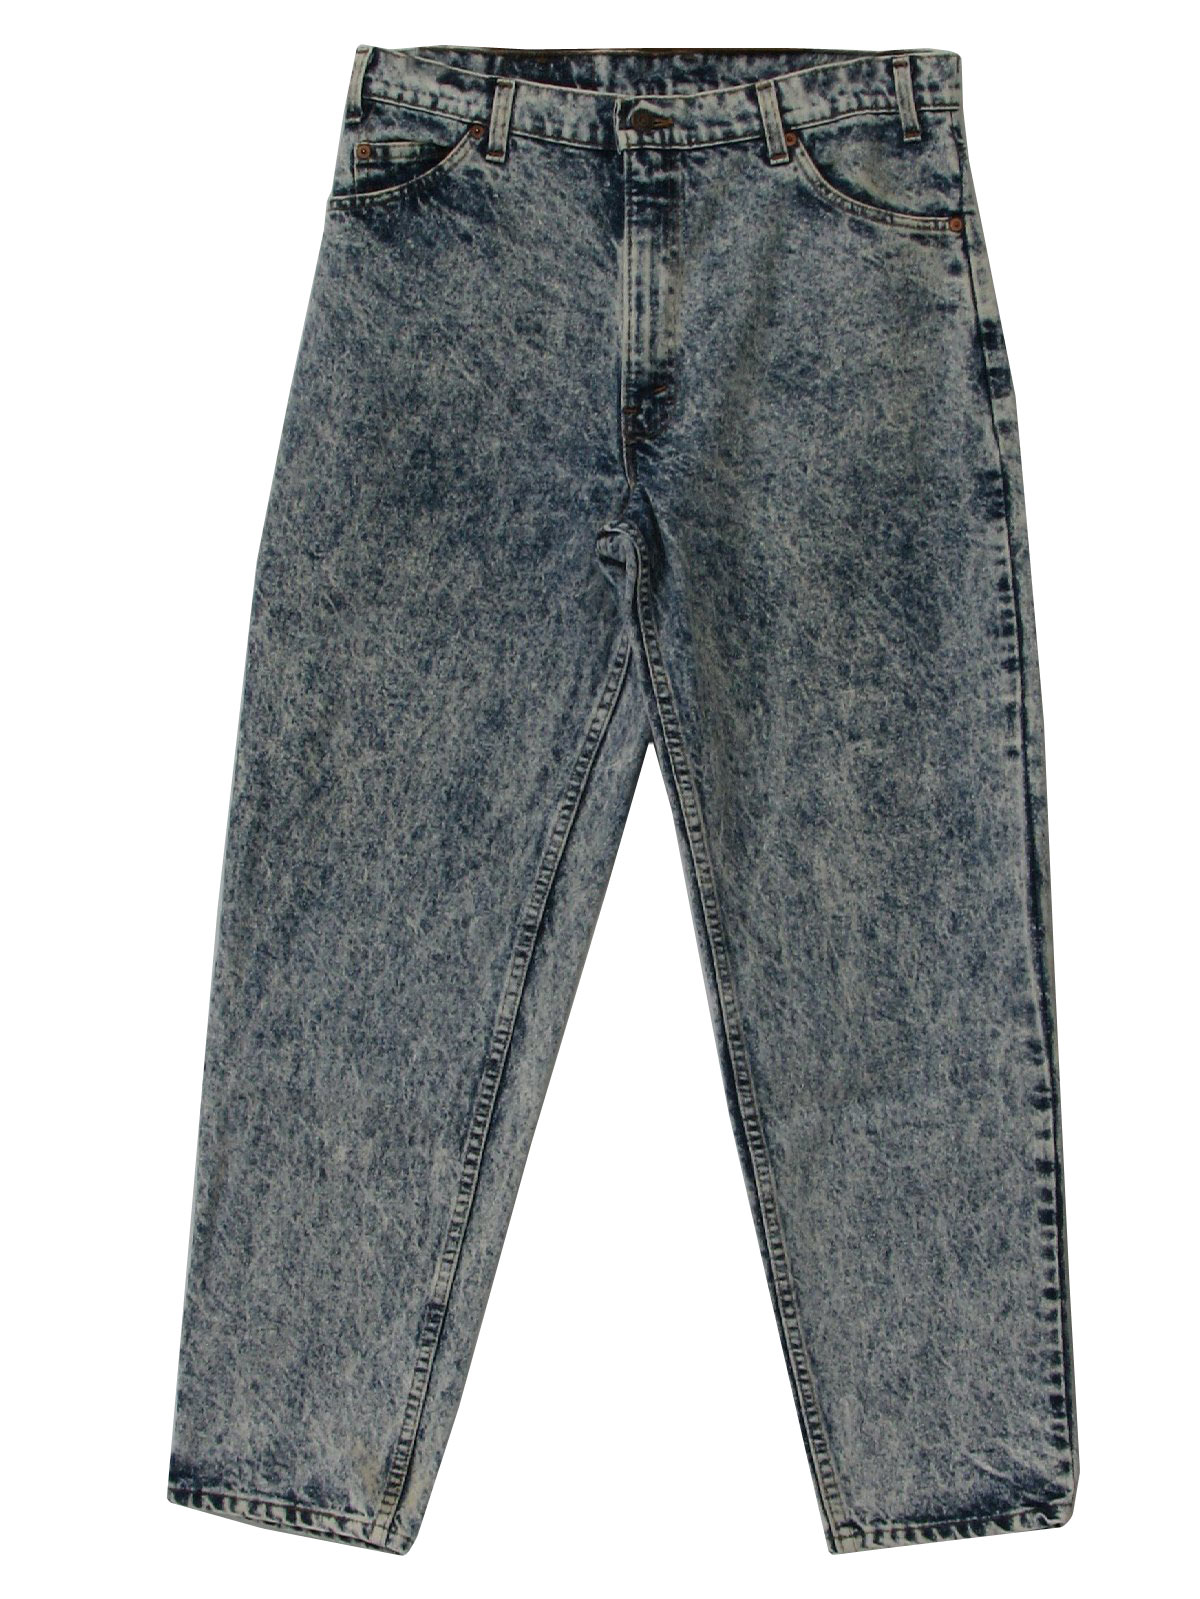 Levis 532 Eighties Vintage Pants: 80s -Levis 532- Mens dark blue and white  acid wash totally 80s cotton denim jeans with classic five pocket cut,  button zip fly closure and slightly tapered